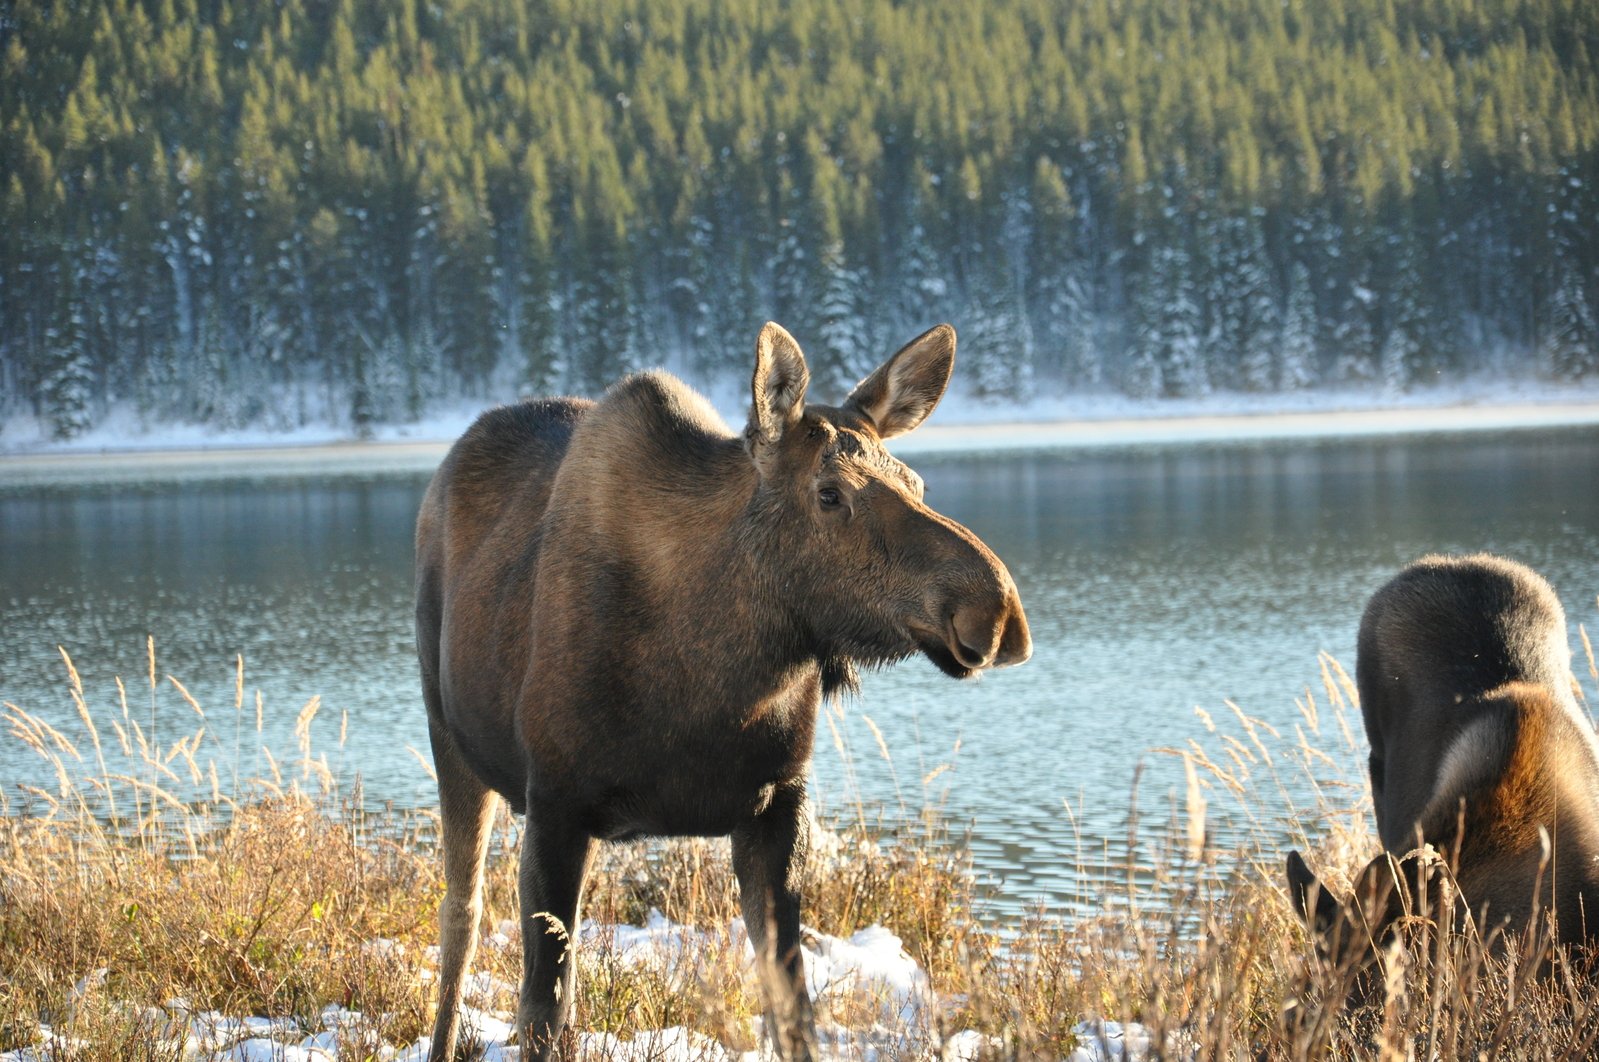 a large moose standing next to another moose on a field